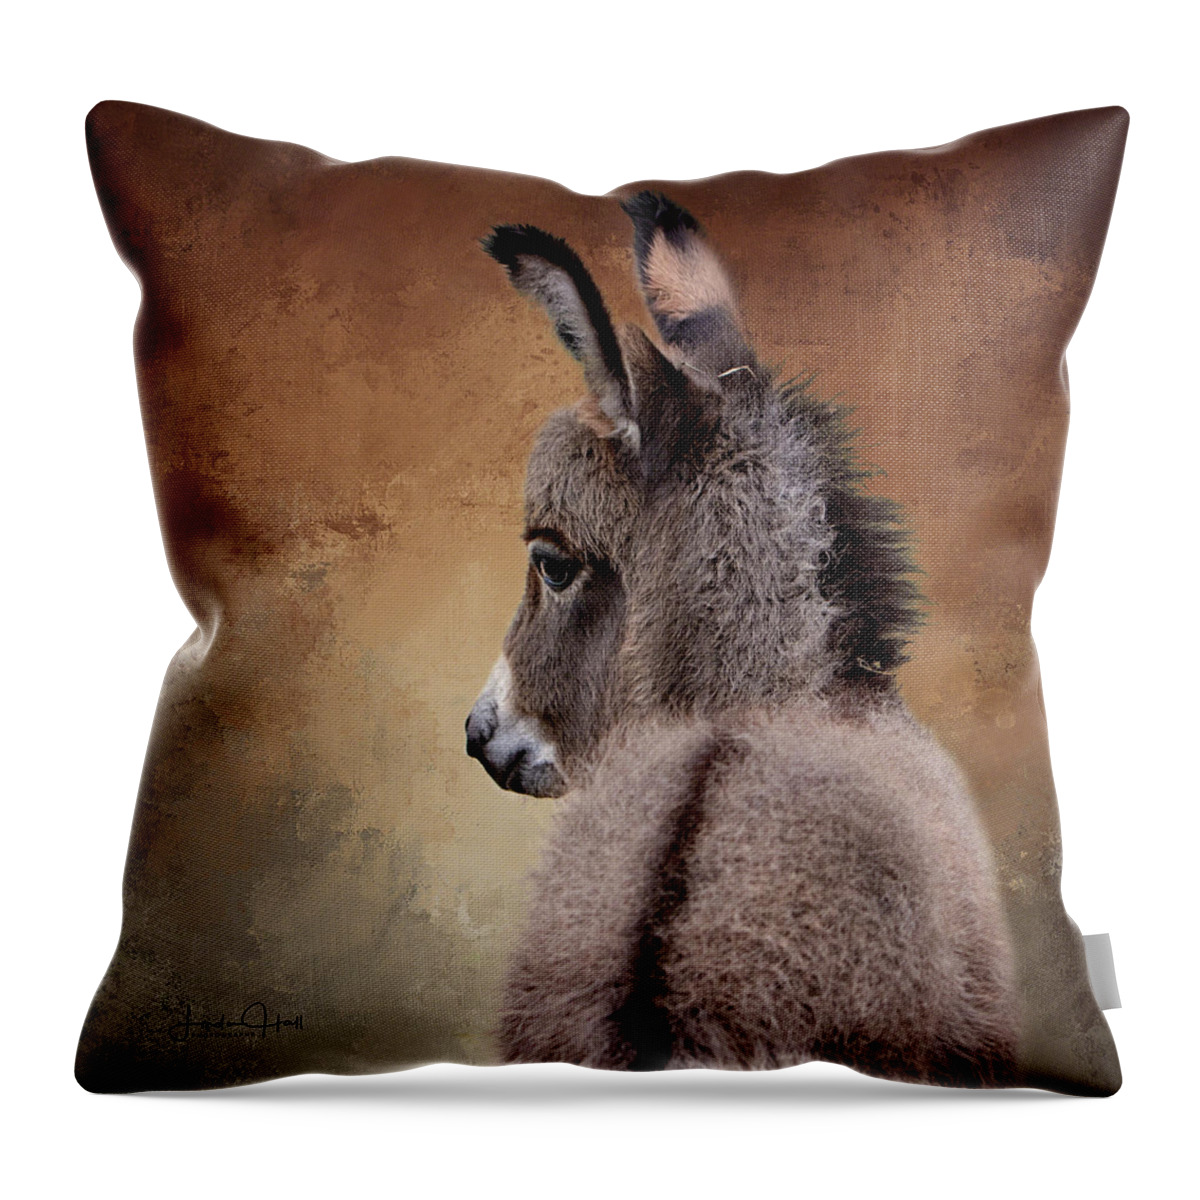 Donkey Throw Pillow featuring the digital art The Spring Baby by Linda Lee Hall